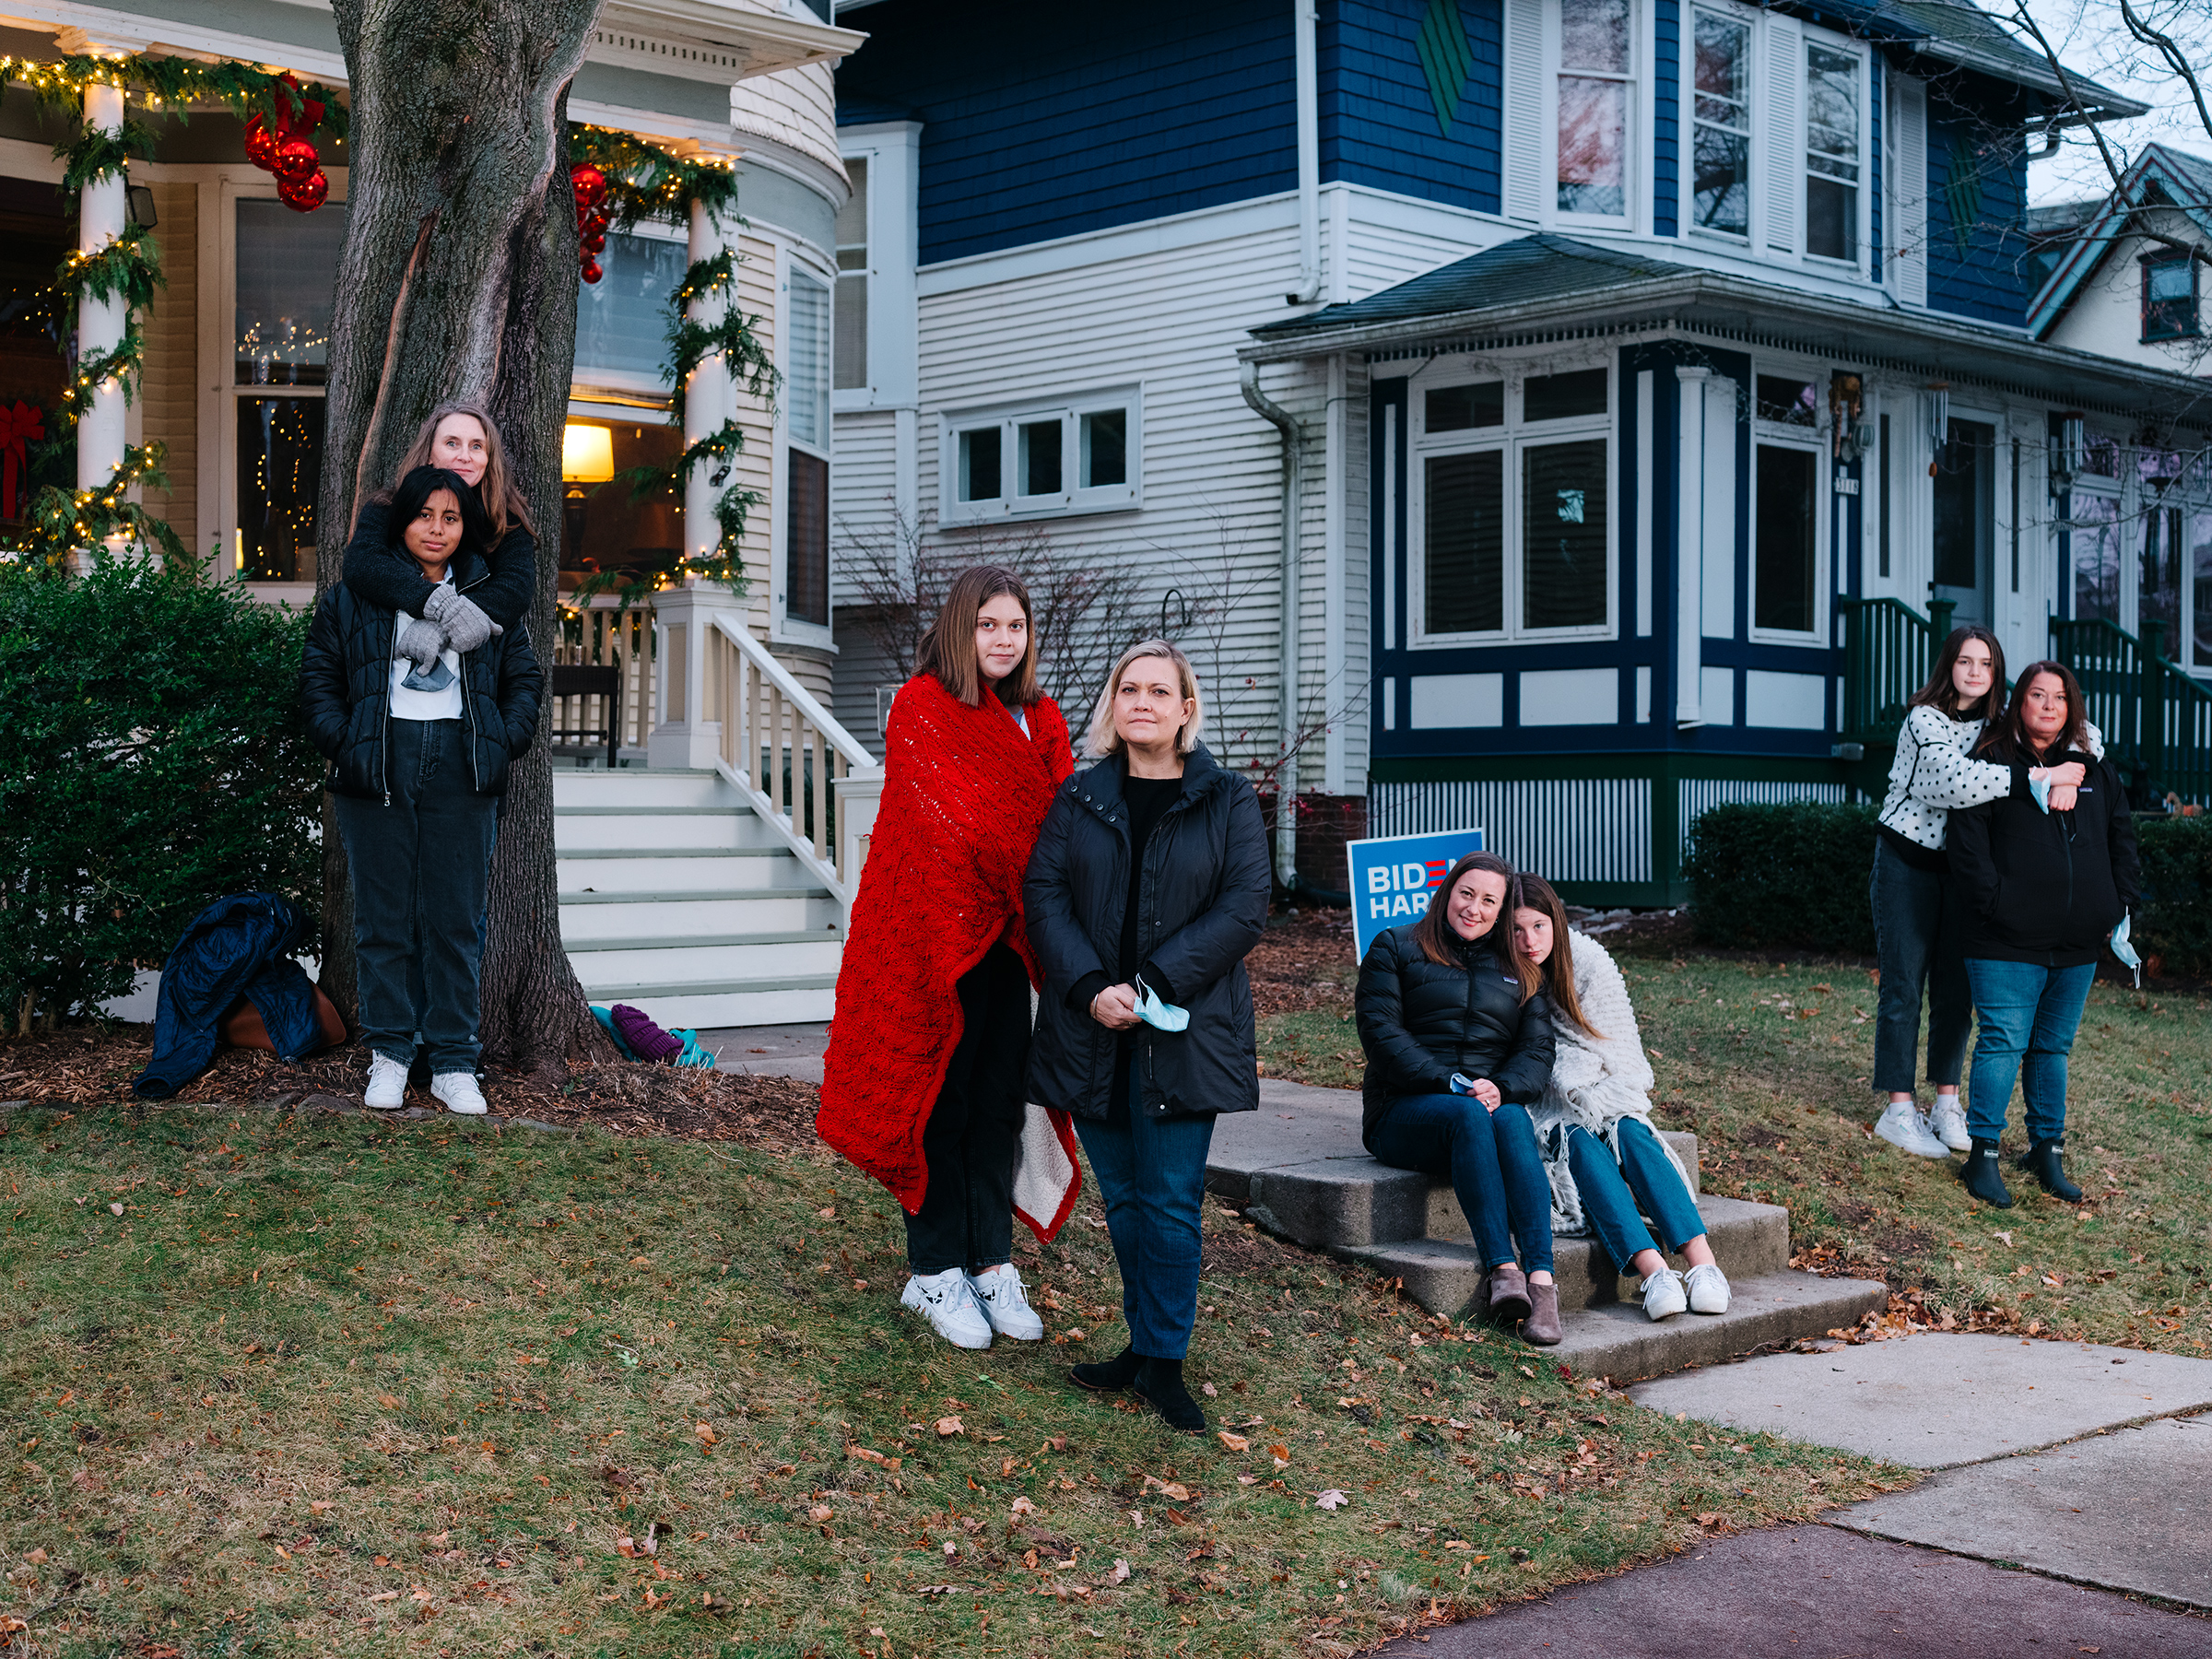 Biden/Harris supporters (from left) Lorna Dilley and Faith Coffaro, Maggie and Carrie Killoran, Caroline Cahill and Eileen Force Cahill, and Alice Stephens and Lulu Rorabeck, on Milwaukee's East Side on Dec. 5, 2020. (David Kasnic for TIME)